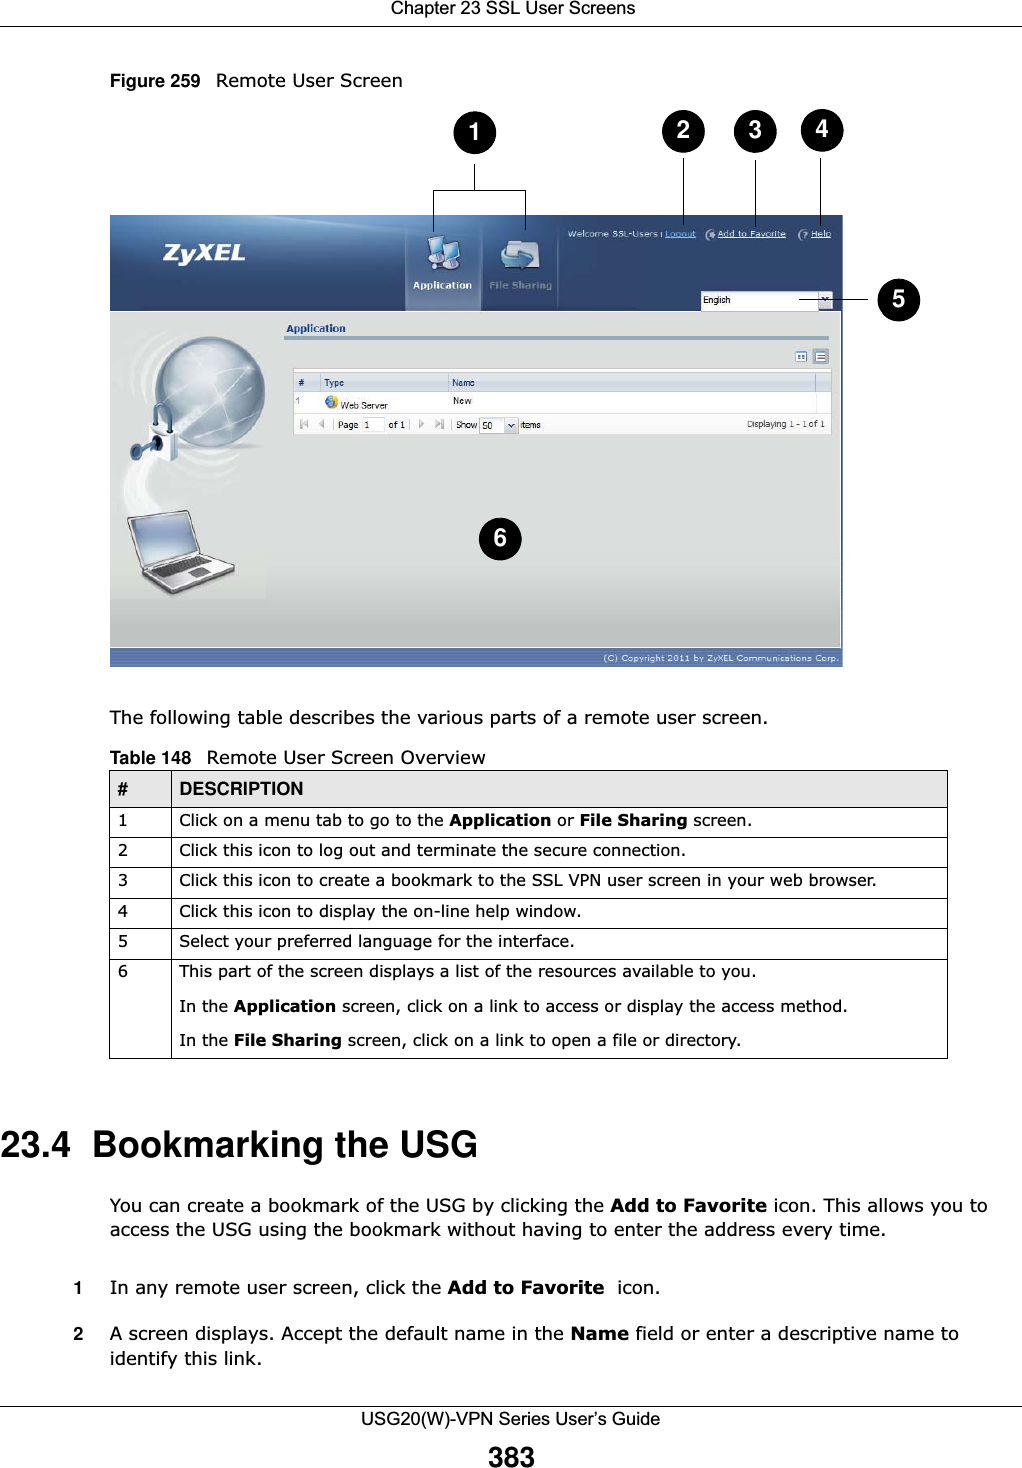  Chapter 23 SSL User ScreensUSG20(W)-VPN Series User’s Guide383Figure 259   Remote User ScreenThe following table describes the various parts of a remote user screen. 23.4  Bookmarking the USGYou can create a bookmark of the USG by clicking the Add to Favorite icon. This allows you to access the USG using the bookmark without having to enter the address every time. 1In any remote user screen, click the Add to Favorite  icon. 2A screen displays. Accept the default name in the Name field or enter a descriptive name to identify this link. Table 148   Remote User Screen Overview #DESCRIPTION1 Click on a menu tab to go to the Application or File Sharing screen. 2 Click this icon to log out and terminate the secure connection.3 Click this icon to create a bookmark to the SSL VPN user screen in your web browser. 4 Click this icon to display the on-line help window. 5 Select your preferred language for the interface. 6 This part of the screen displays a list of the resources available to you. In the Application screen, click on a link to access or display the access method. In the File Sharing screen, click on a link to open a file or directory. 234516